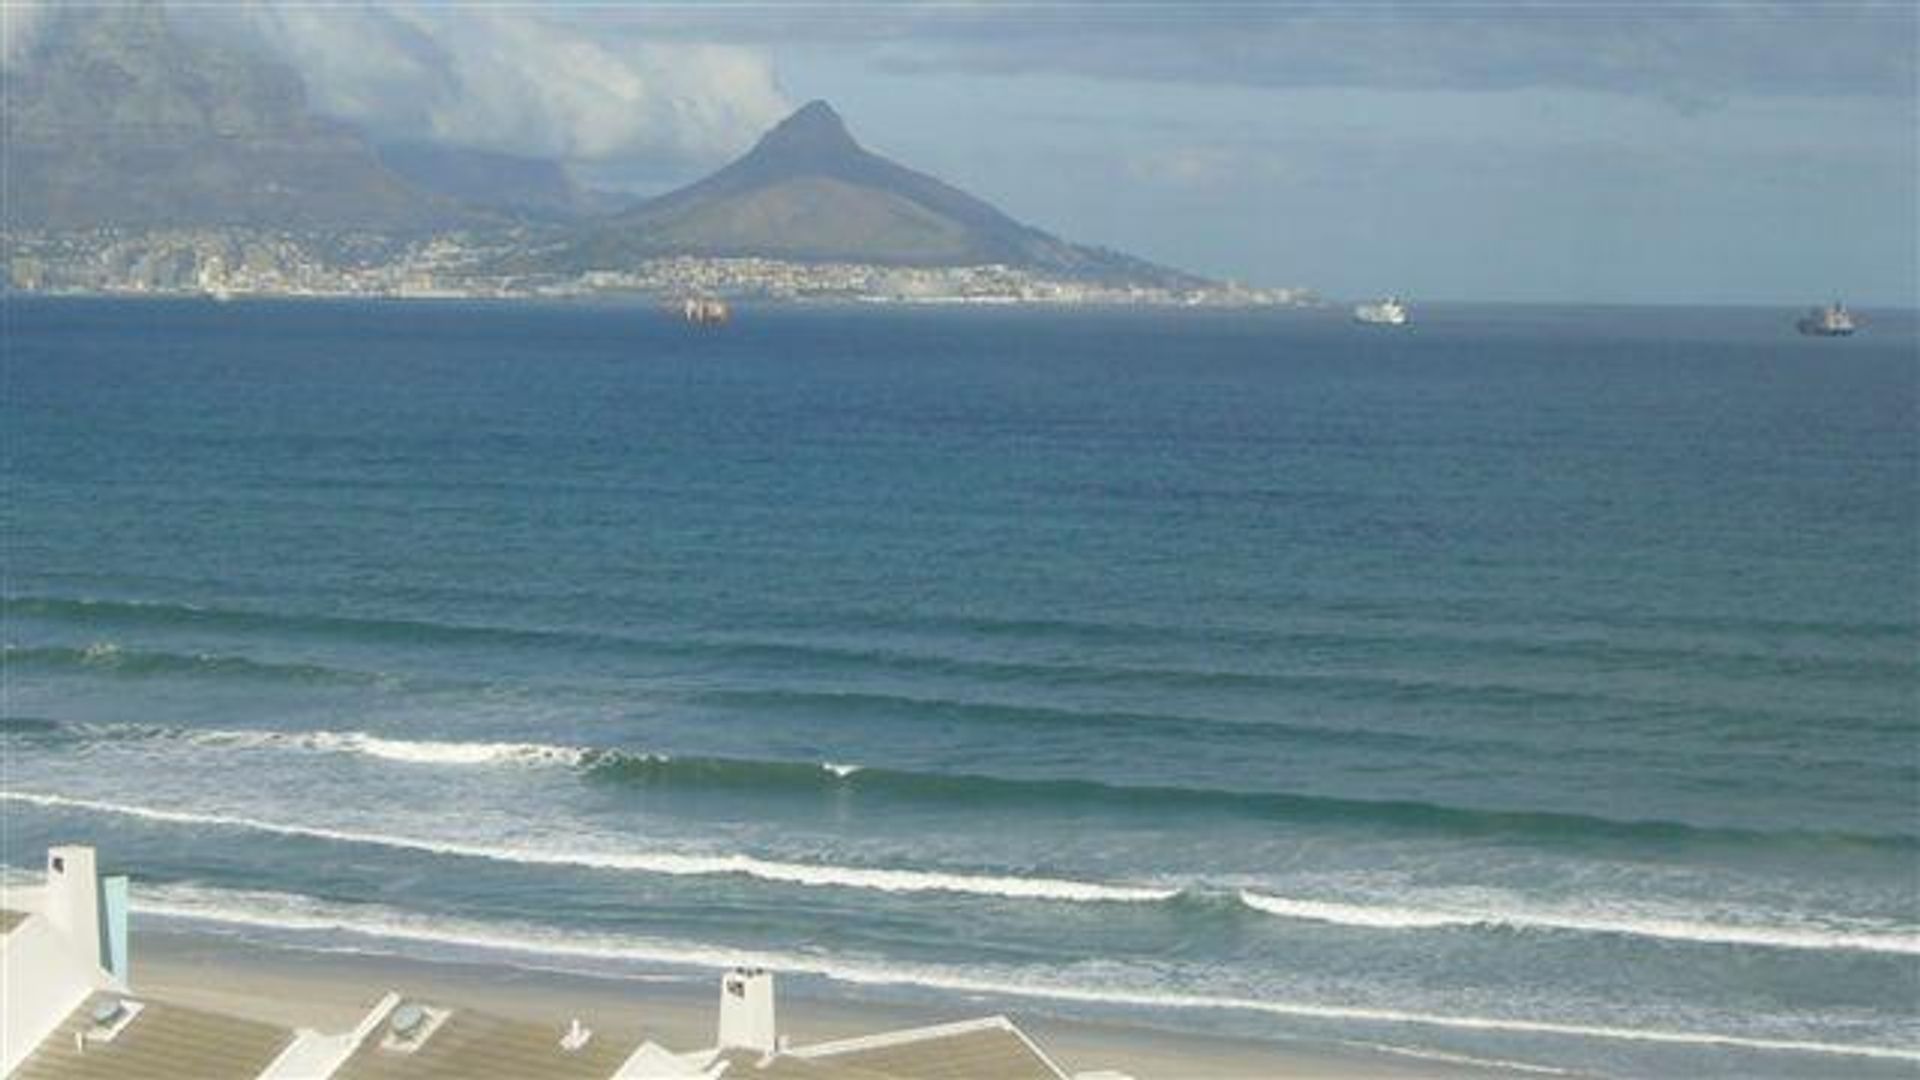 3 Bedroom Property for Sale in Bloubergrant Western Cape